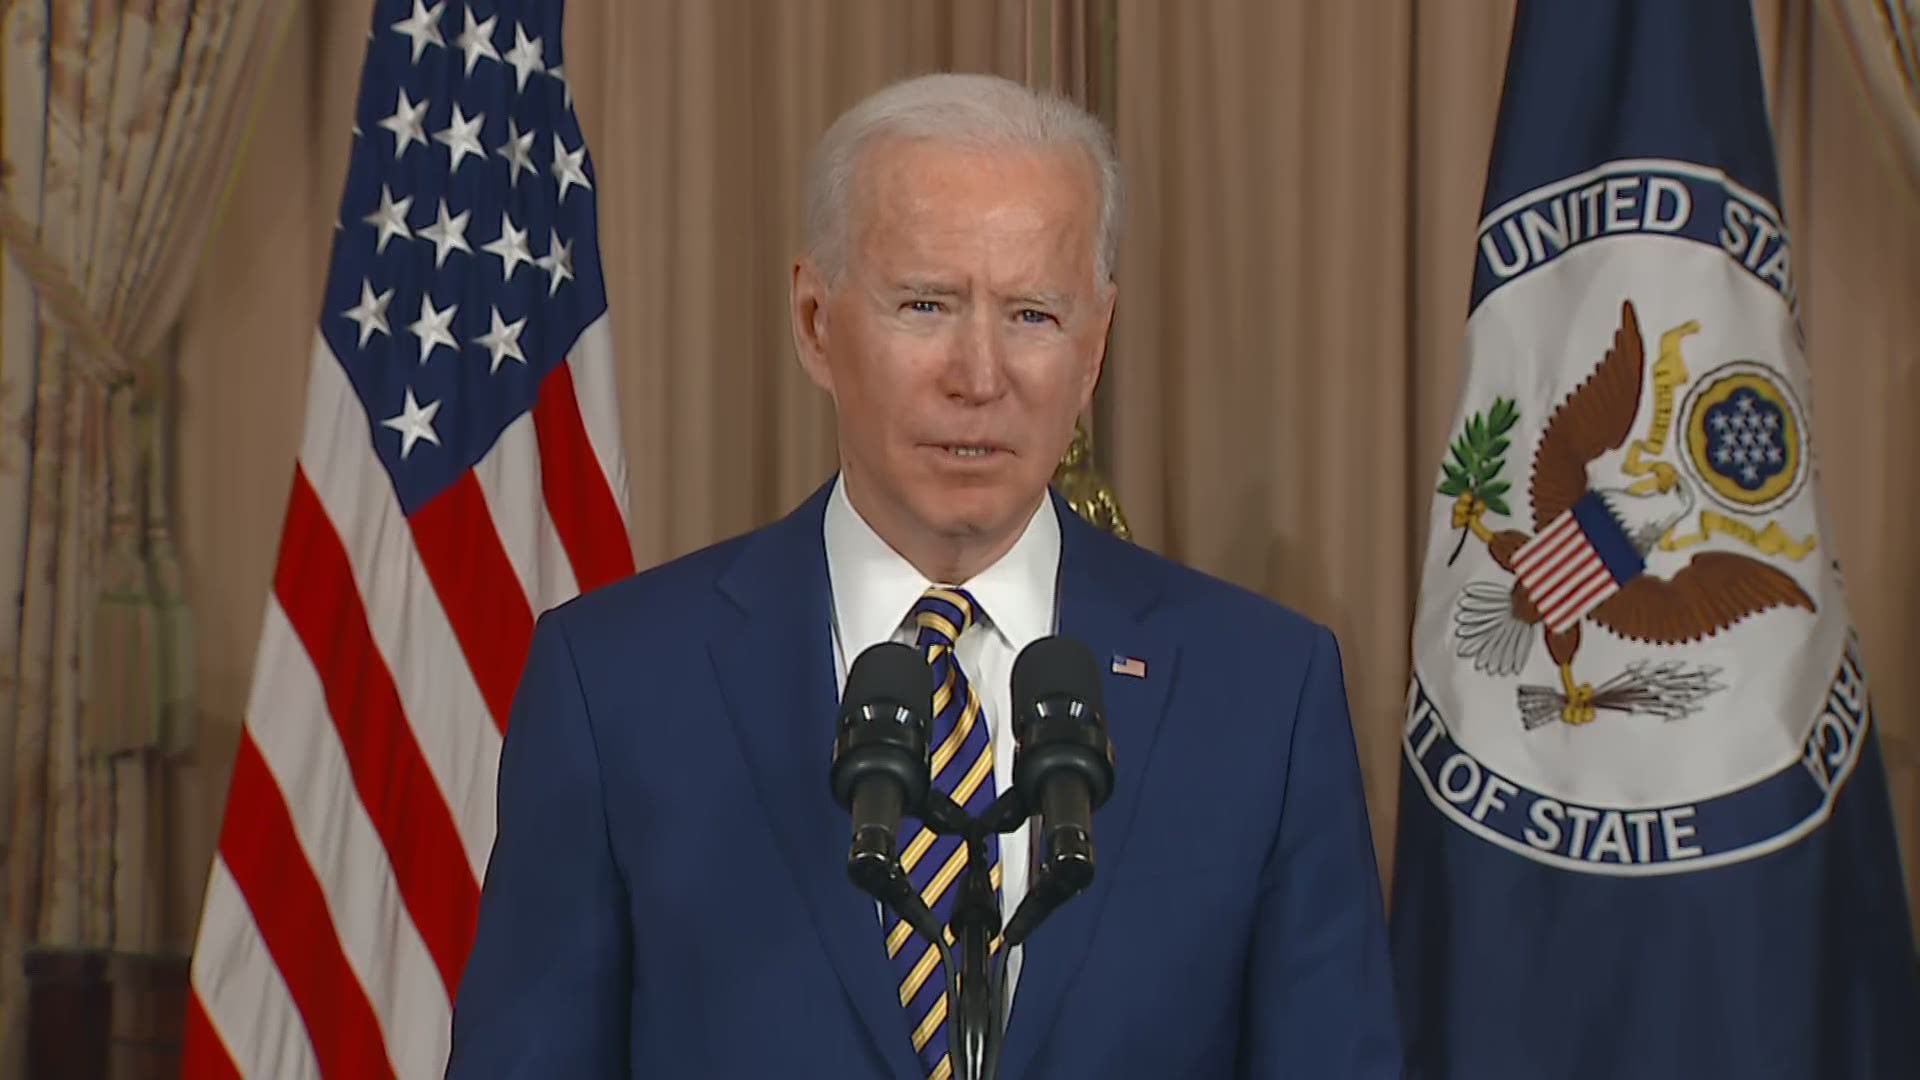 President Joe Biden made clear Thursday that the world should expect a more diplomatically engaged United States moving forward.